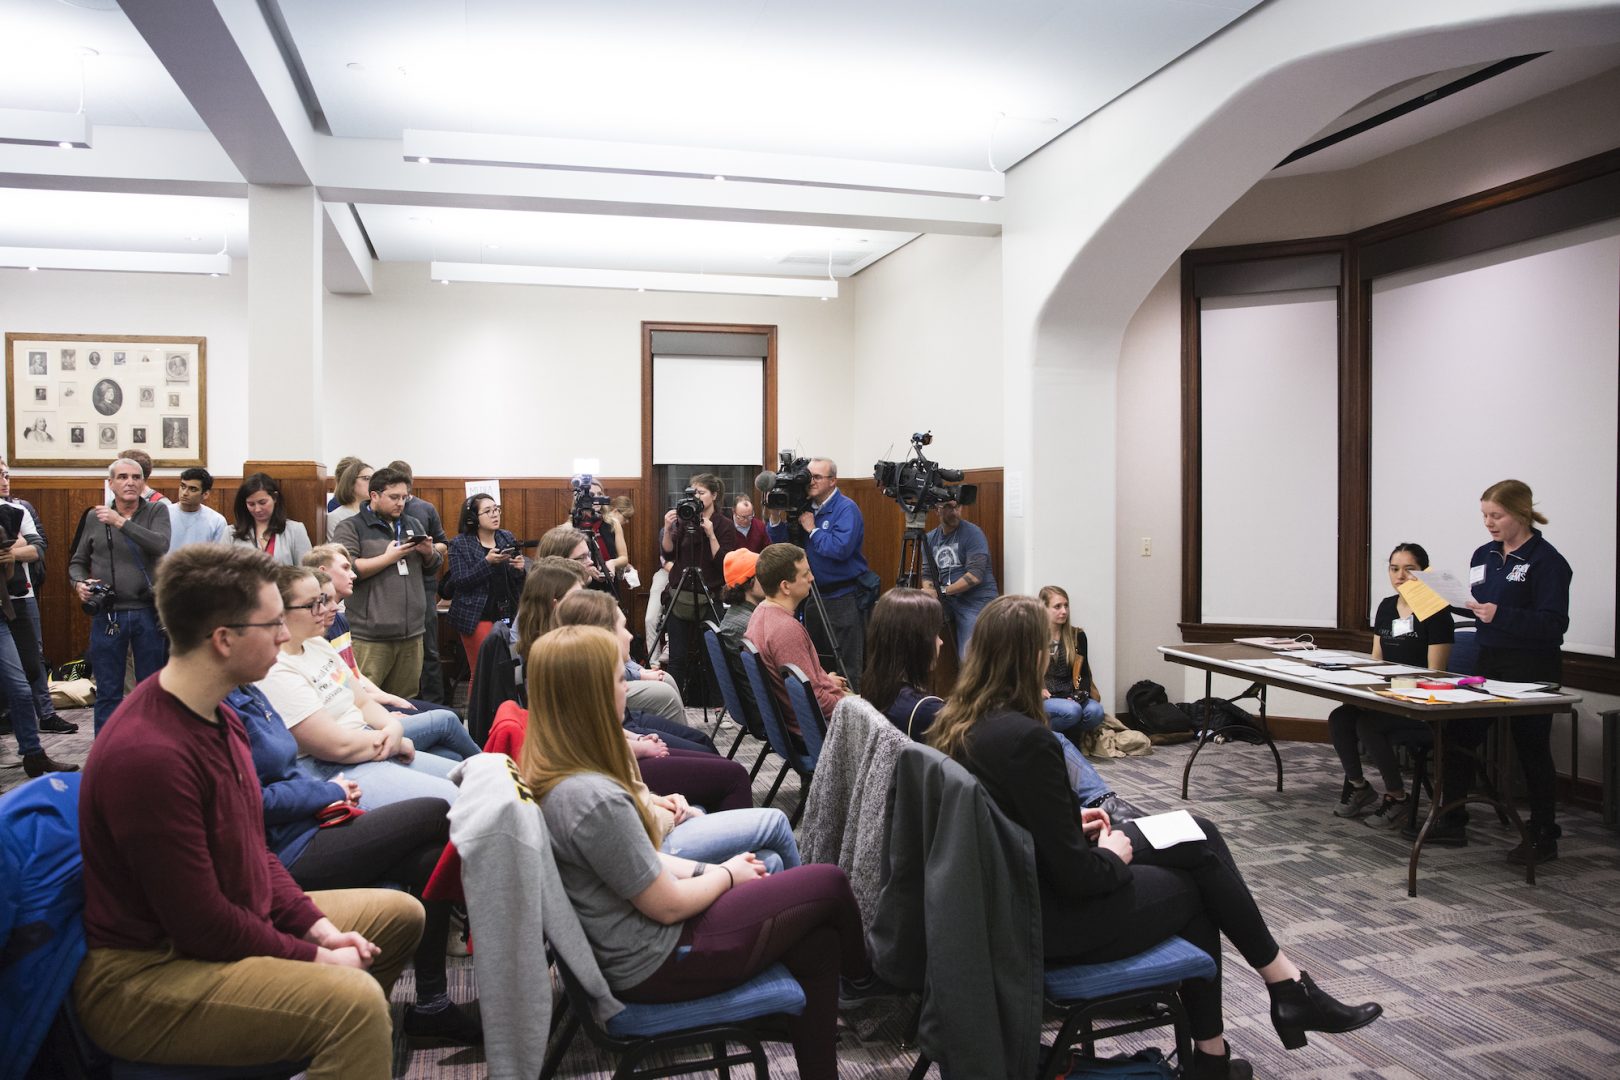 Fourteen Iowa residents partake in a satellite Iowa caucus at the University of Pennsylvania on February 3, 2020. The group ultimately assigned two delegate votes to Bernie Sanders, one to Elizabeth Warren, and one to Pete Buttigieg.